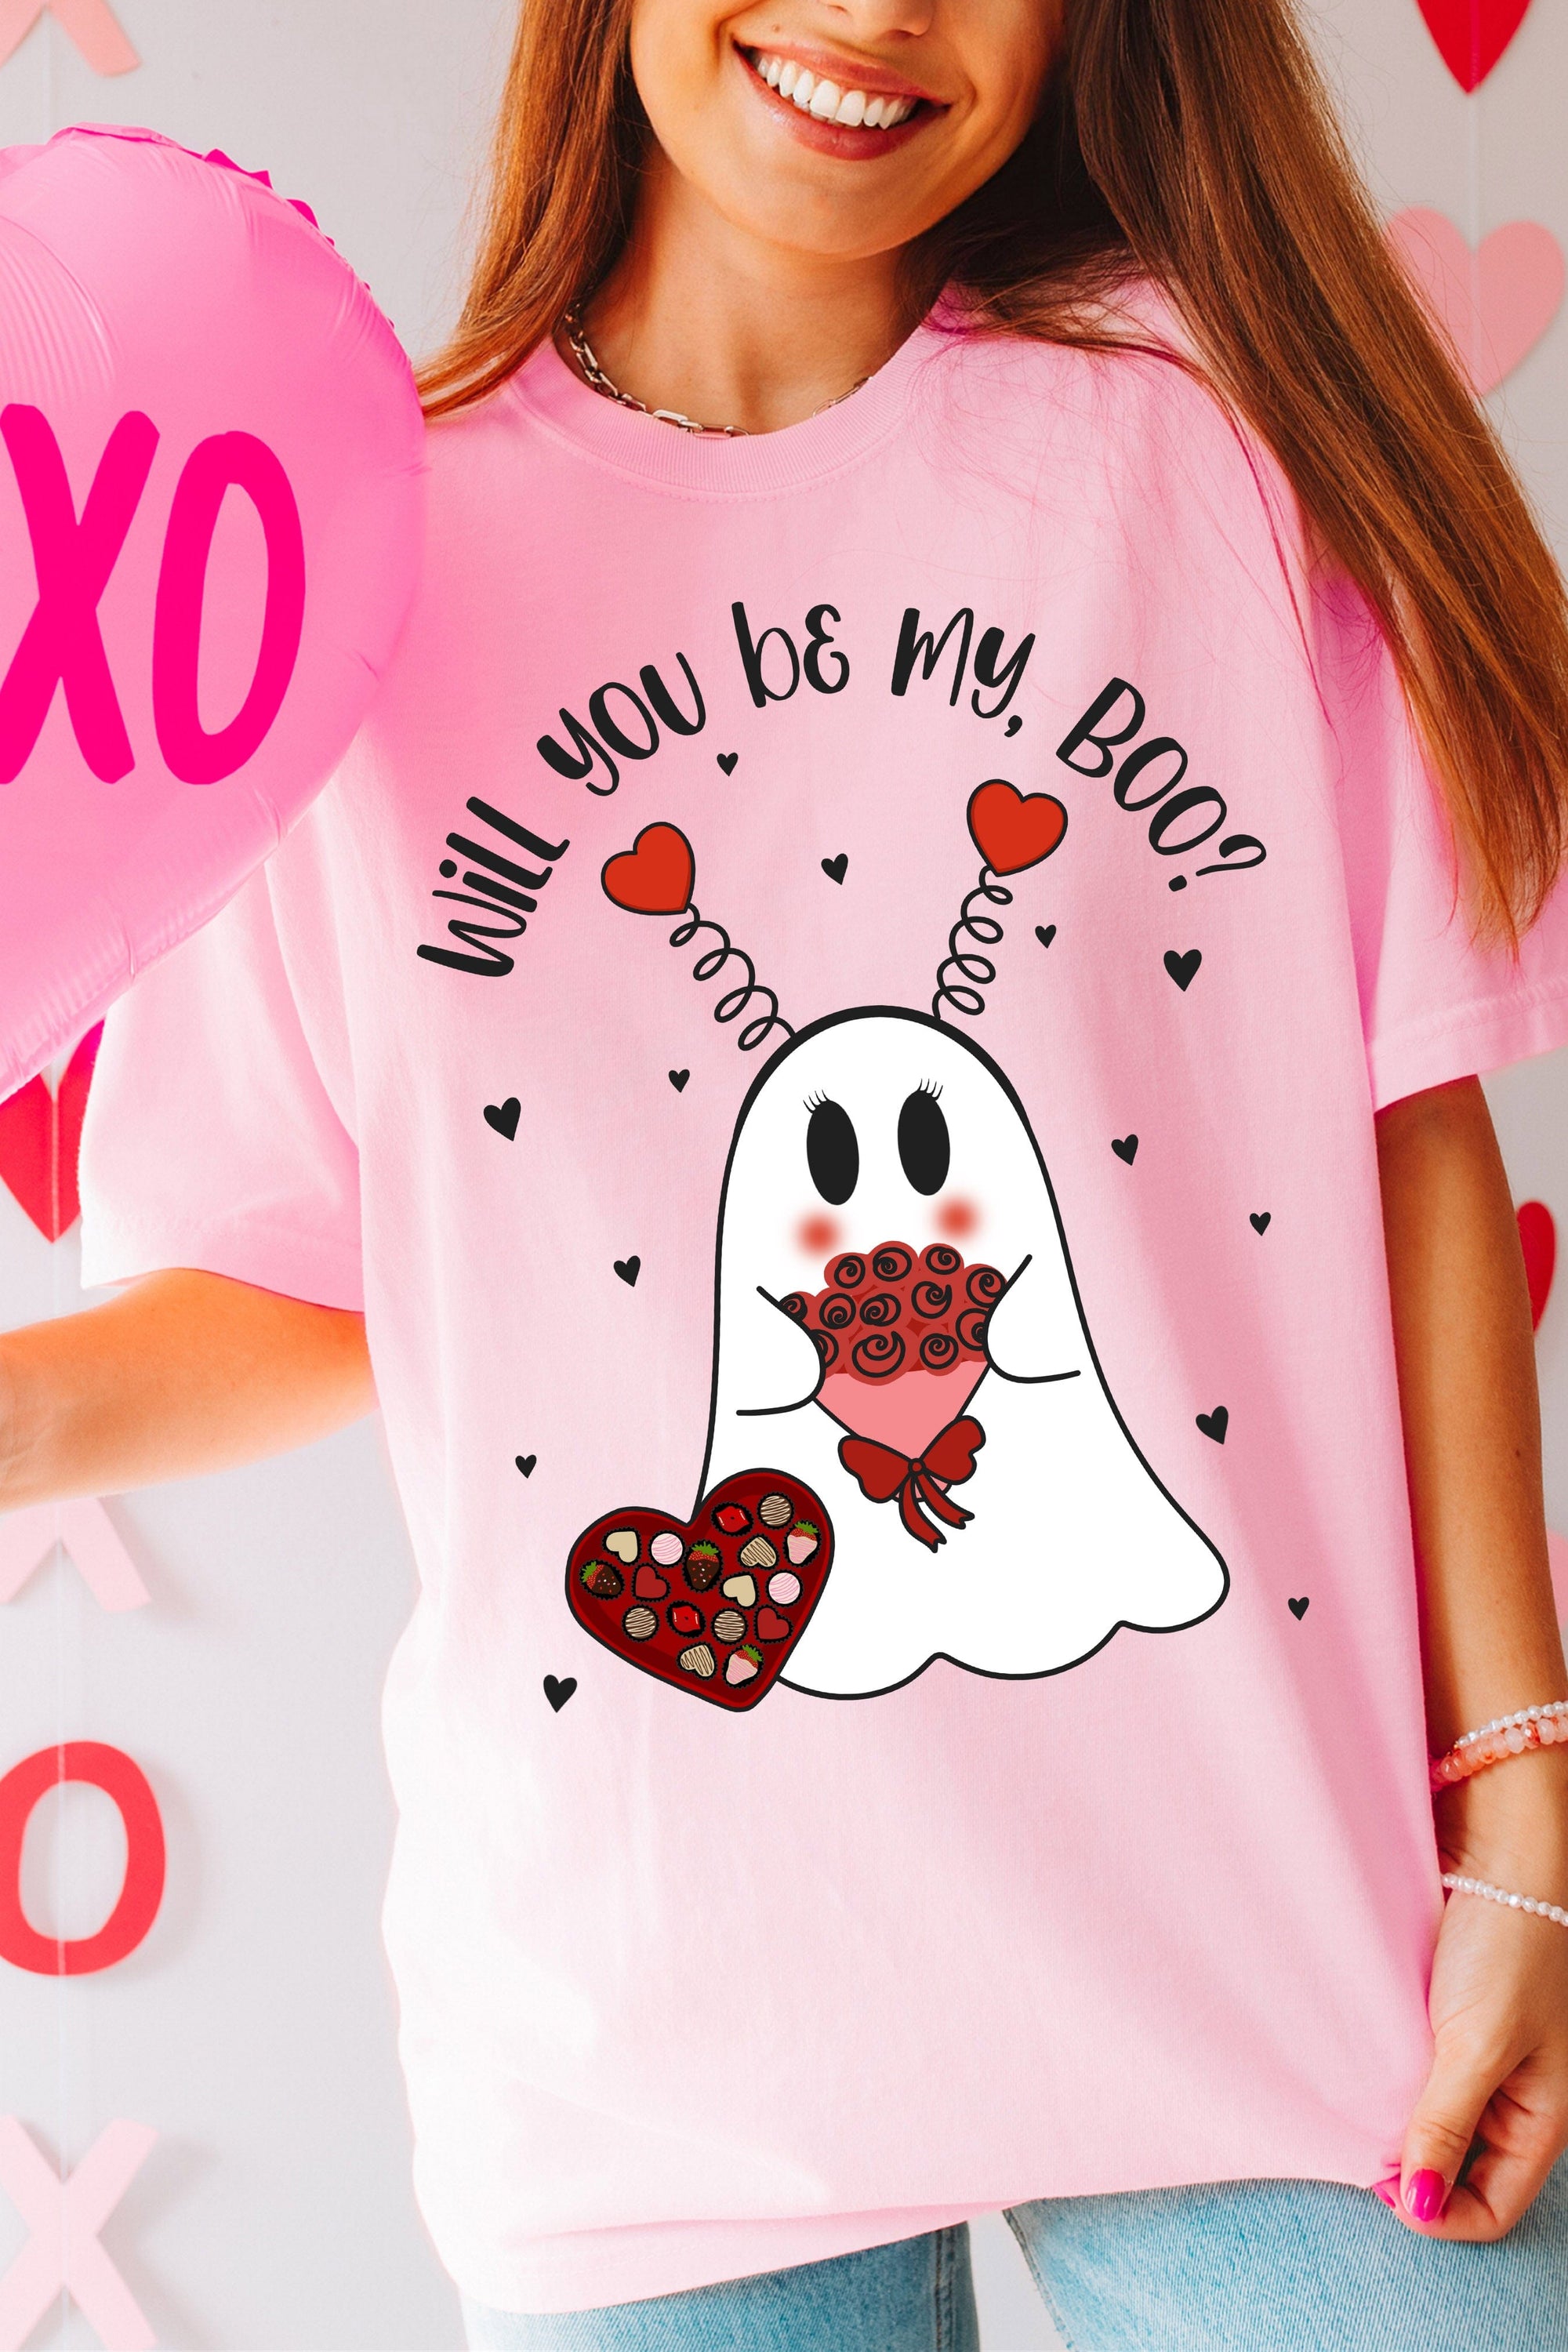 Will You Be My Boo T-Shirt